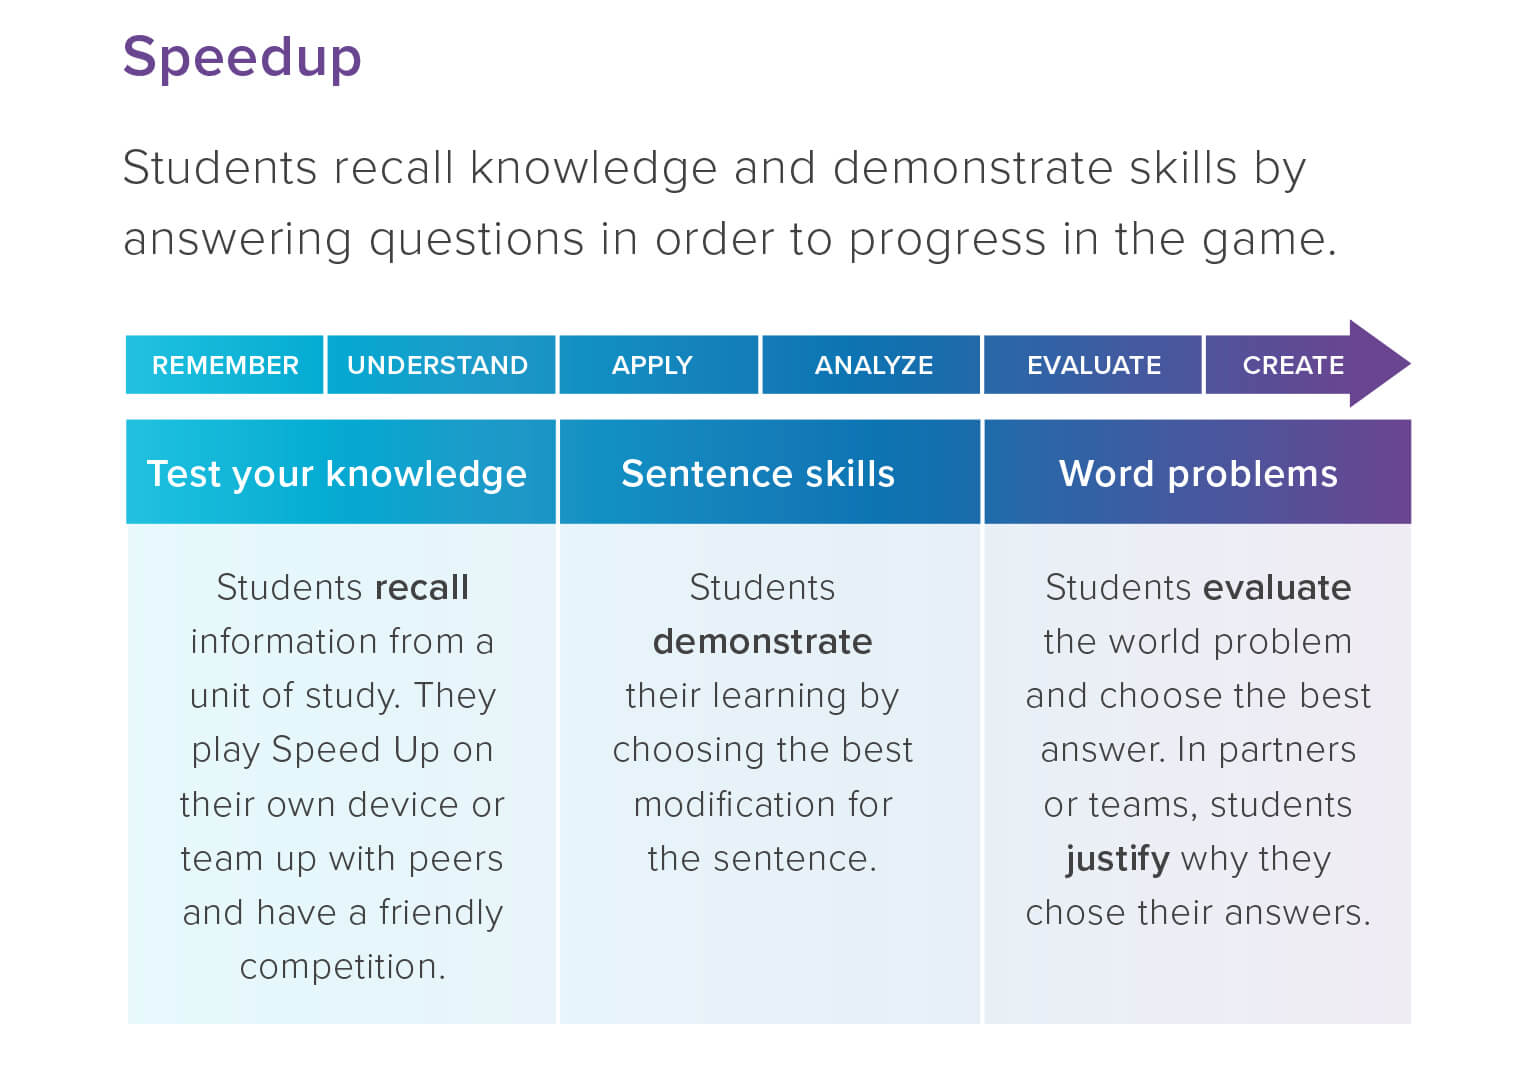 Image illustrating a gamified learning activity in the classroom.